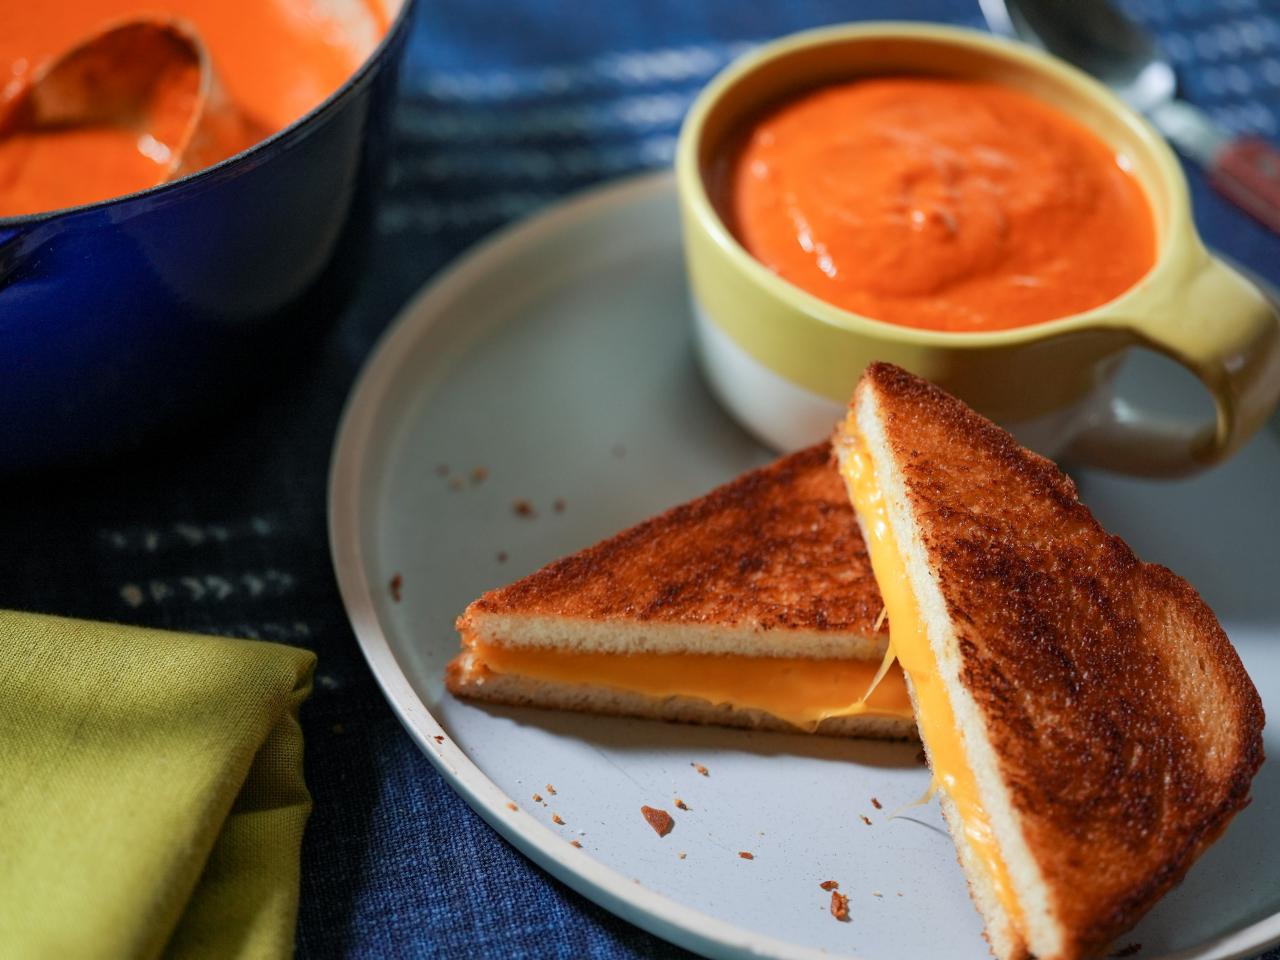 https://food.fnr.sndimg.com/content/dam/images/food/fullset/2022/03/02/KC3006_Grilled-Cheese-and-Creamy-Tomato-Soup.jpg.rend.hgtvcom.1280.960.suffix/1646242499245.jpeg